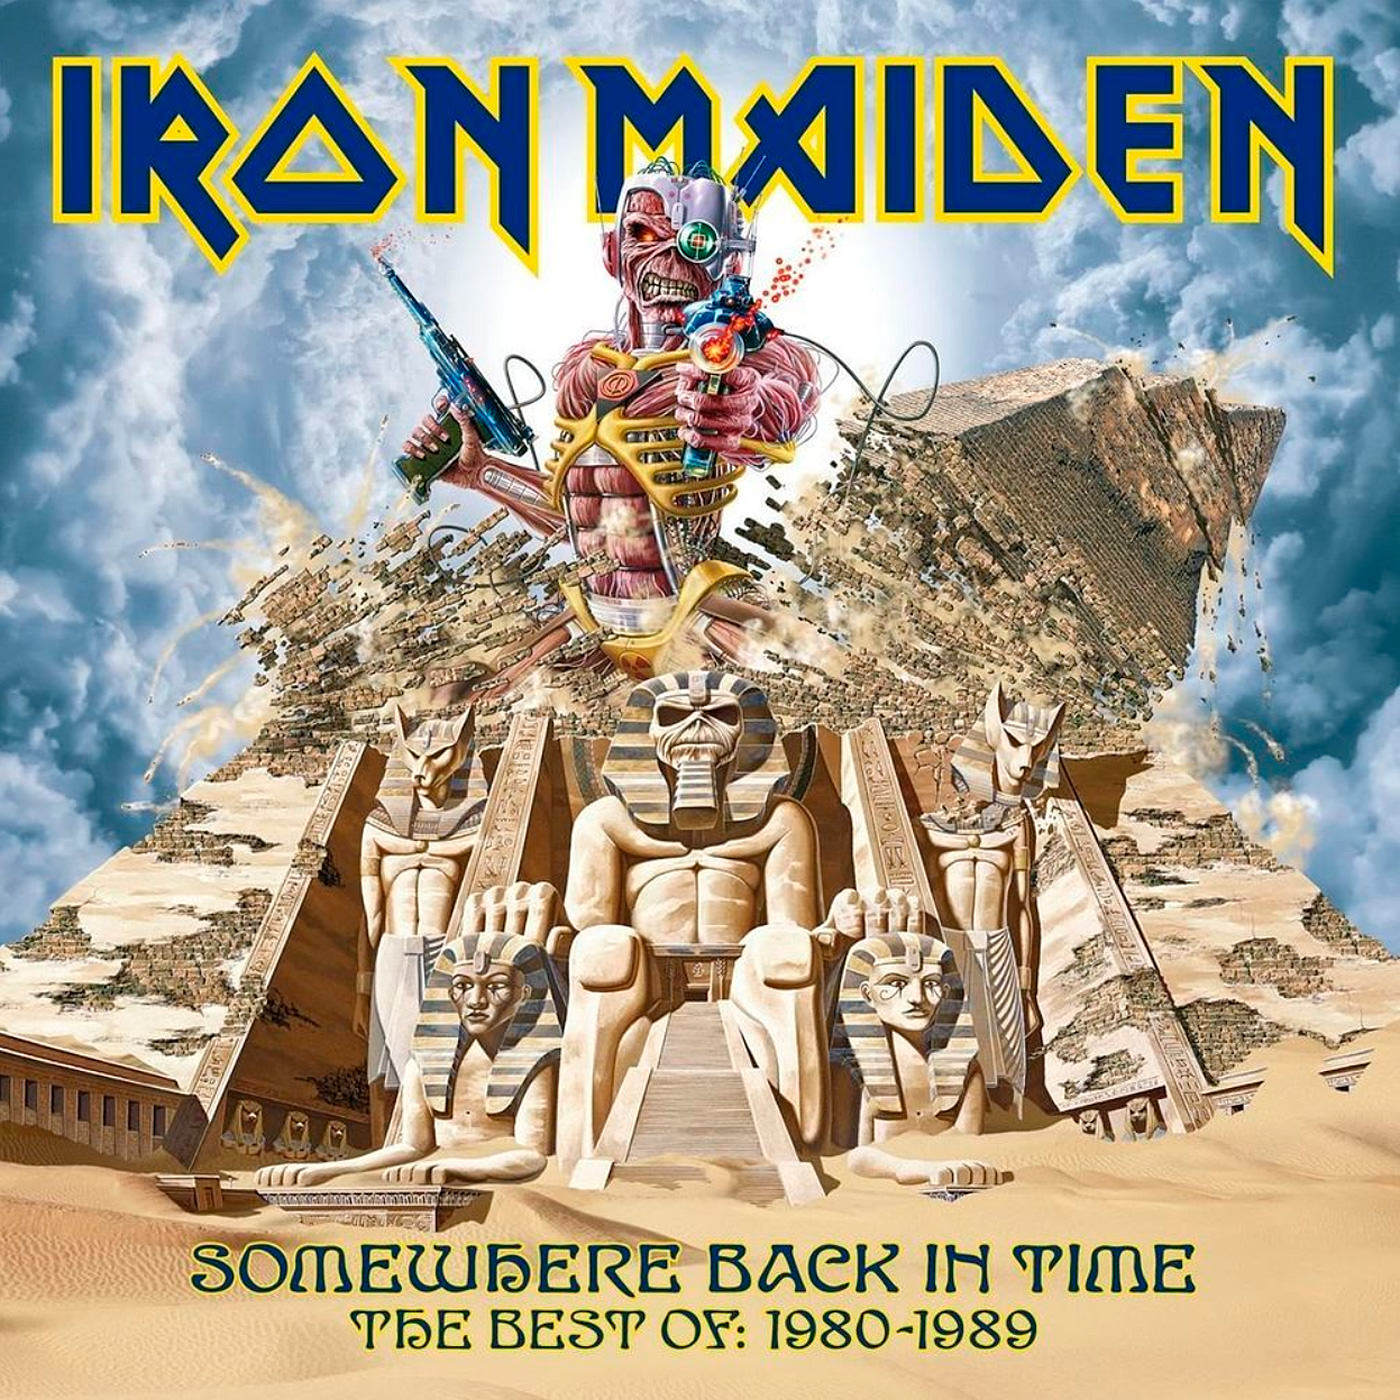 Iron Maiden – Somewhere Back In Time: The Best Of 1990-2010 (2008/2015) [Qobuz FLAC 24bit/48kHz]